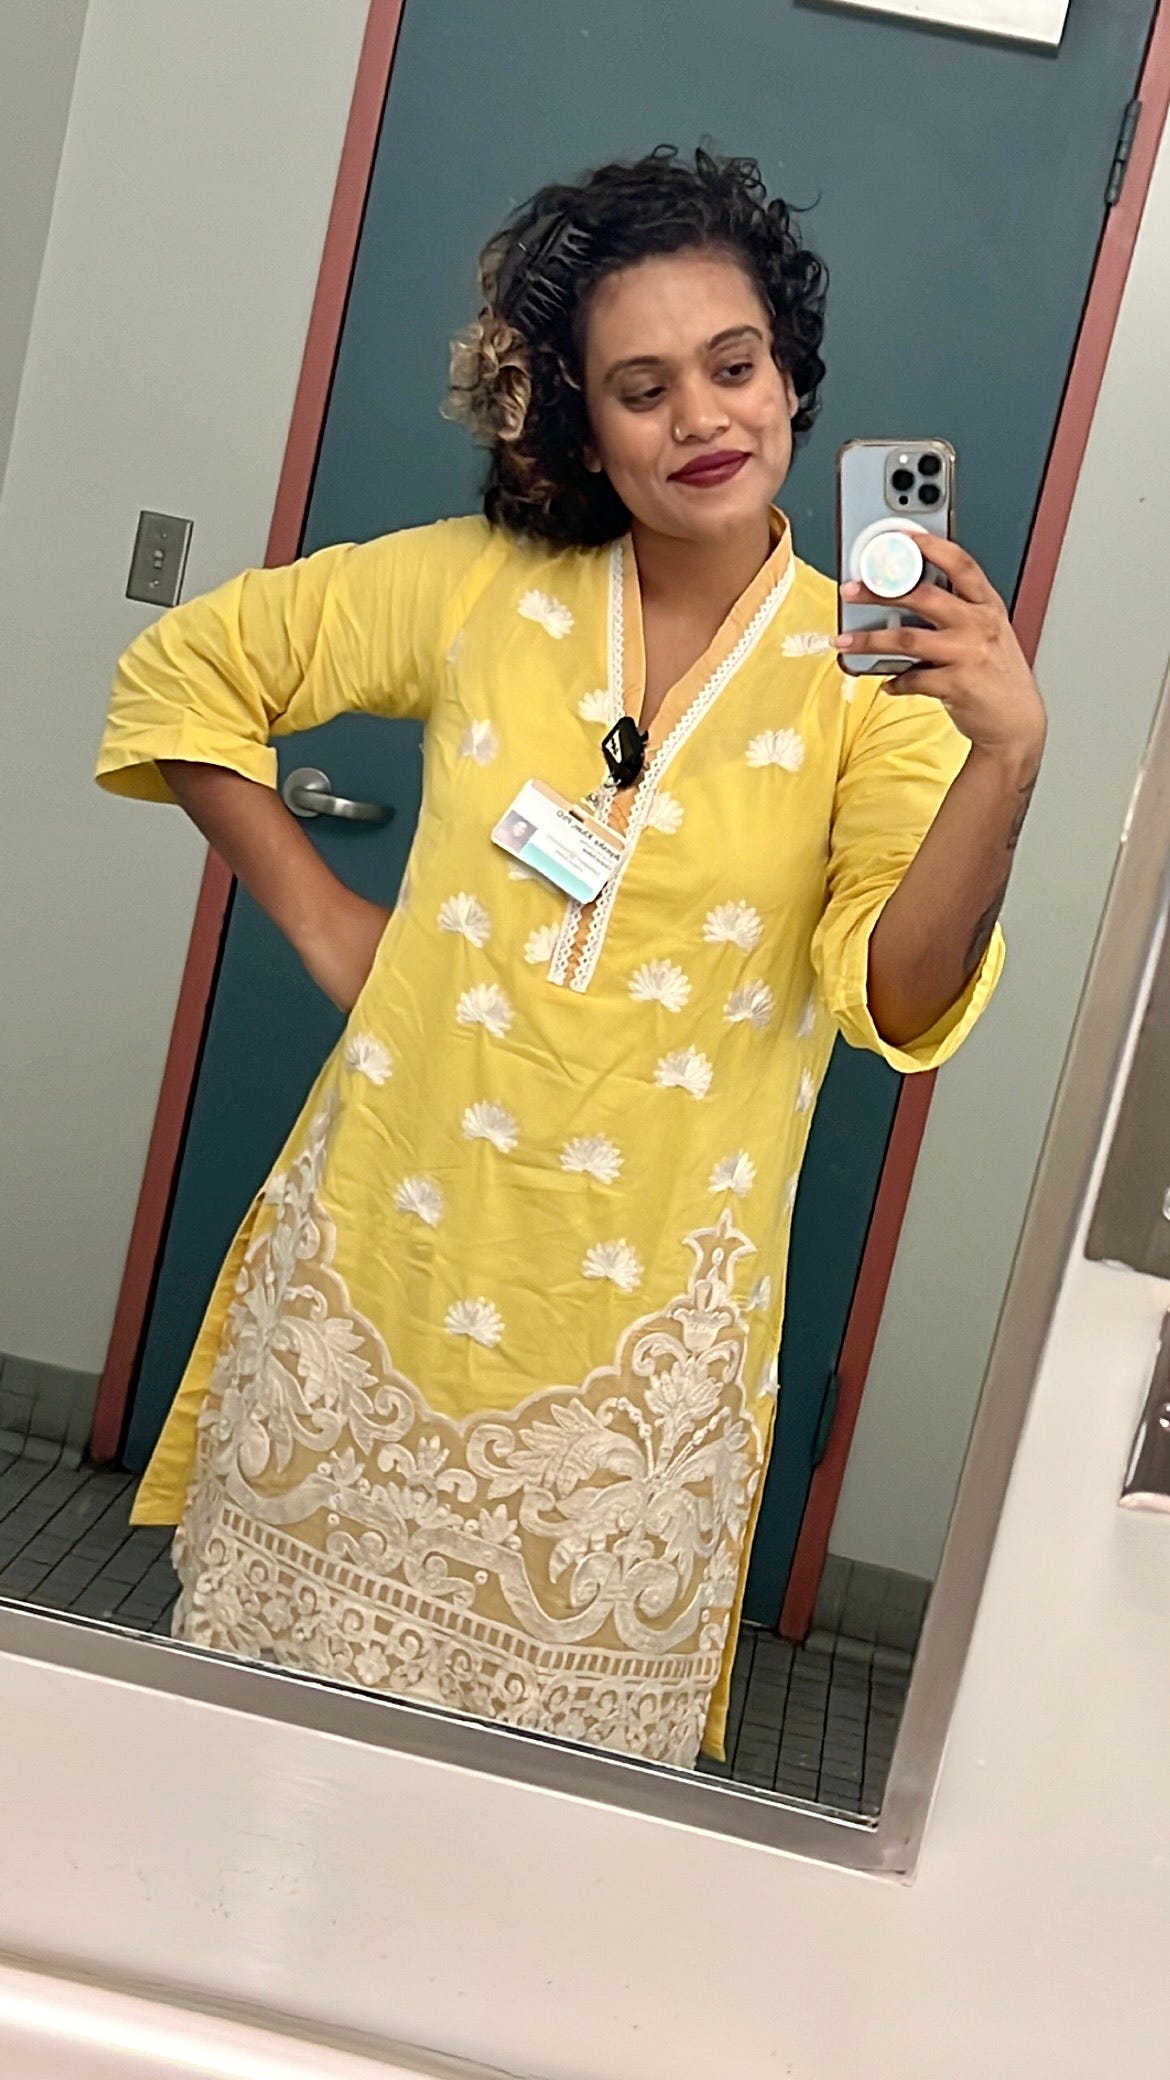 Ayesha taking a selfie in a bathroom mirror at work wearing a handmade, vibrant, yellow, traditional South Asian Shalwar Kameez outfit